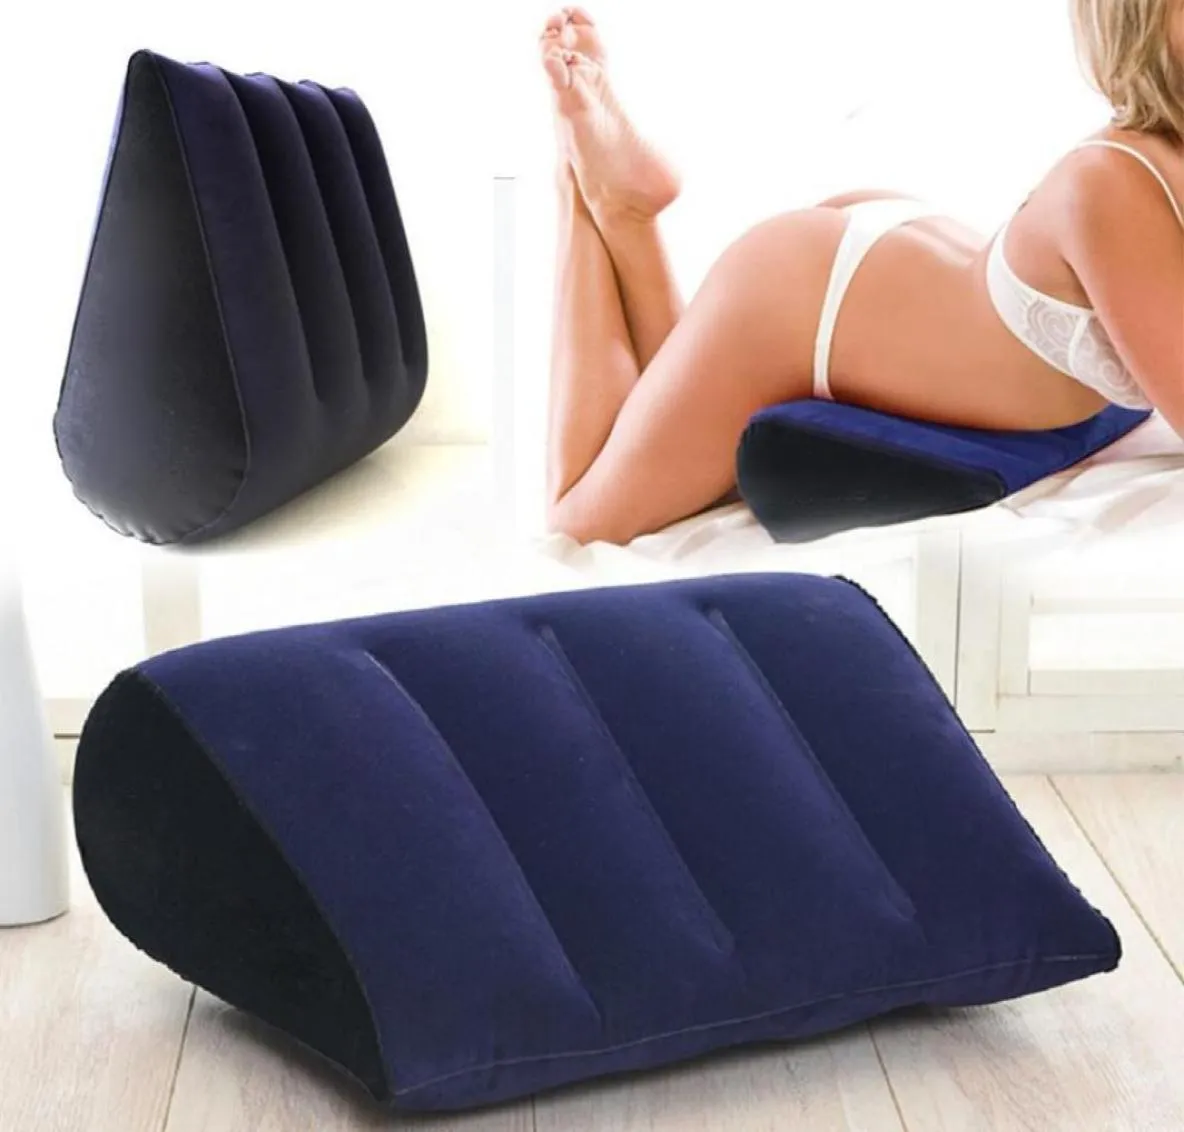 New Arrival Durable 45 16 36cm Inflatable Aid Wedge Durable Pillow Love Position Cushion Couple Comfortable Soft Furniture LJ204662930